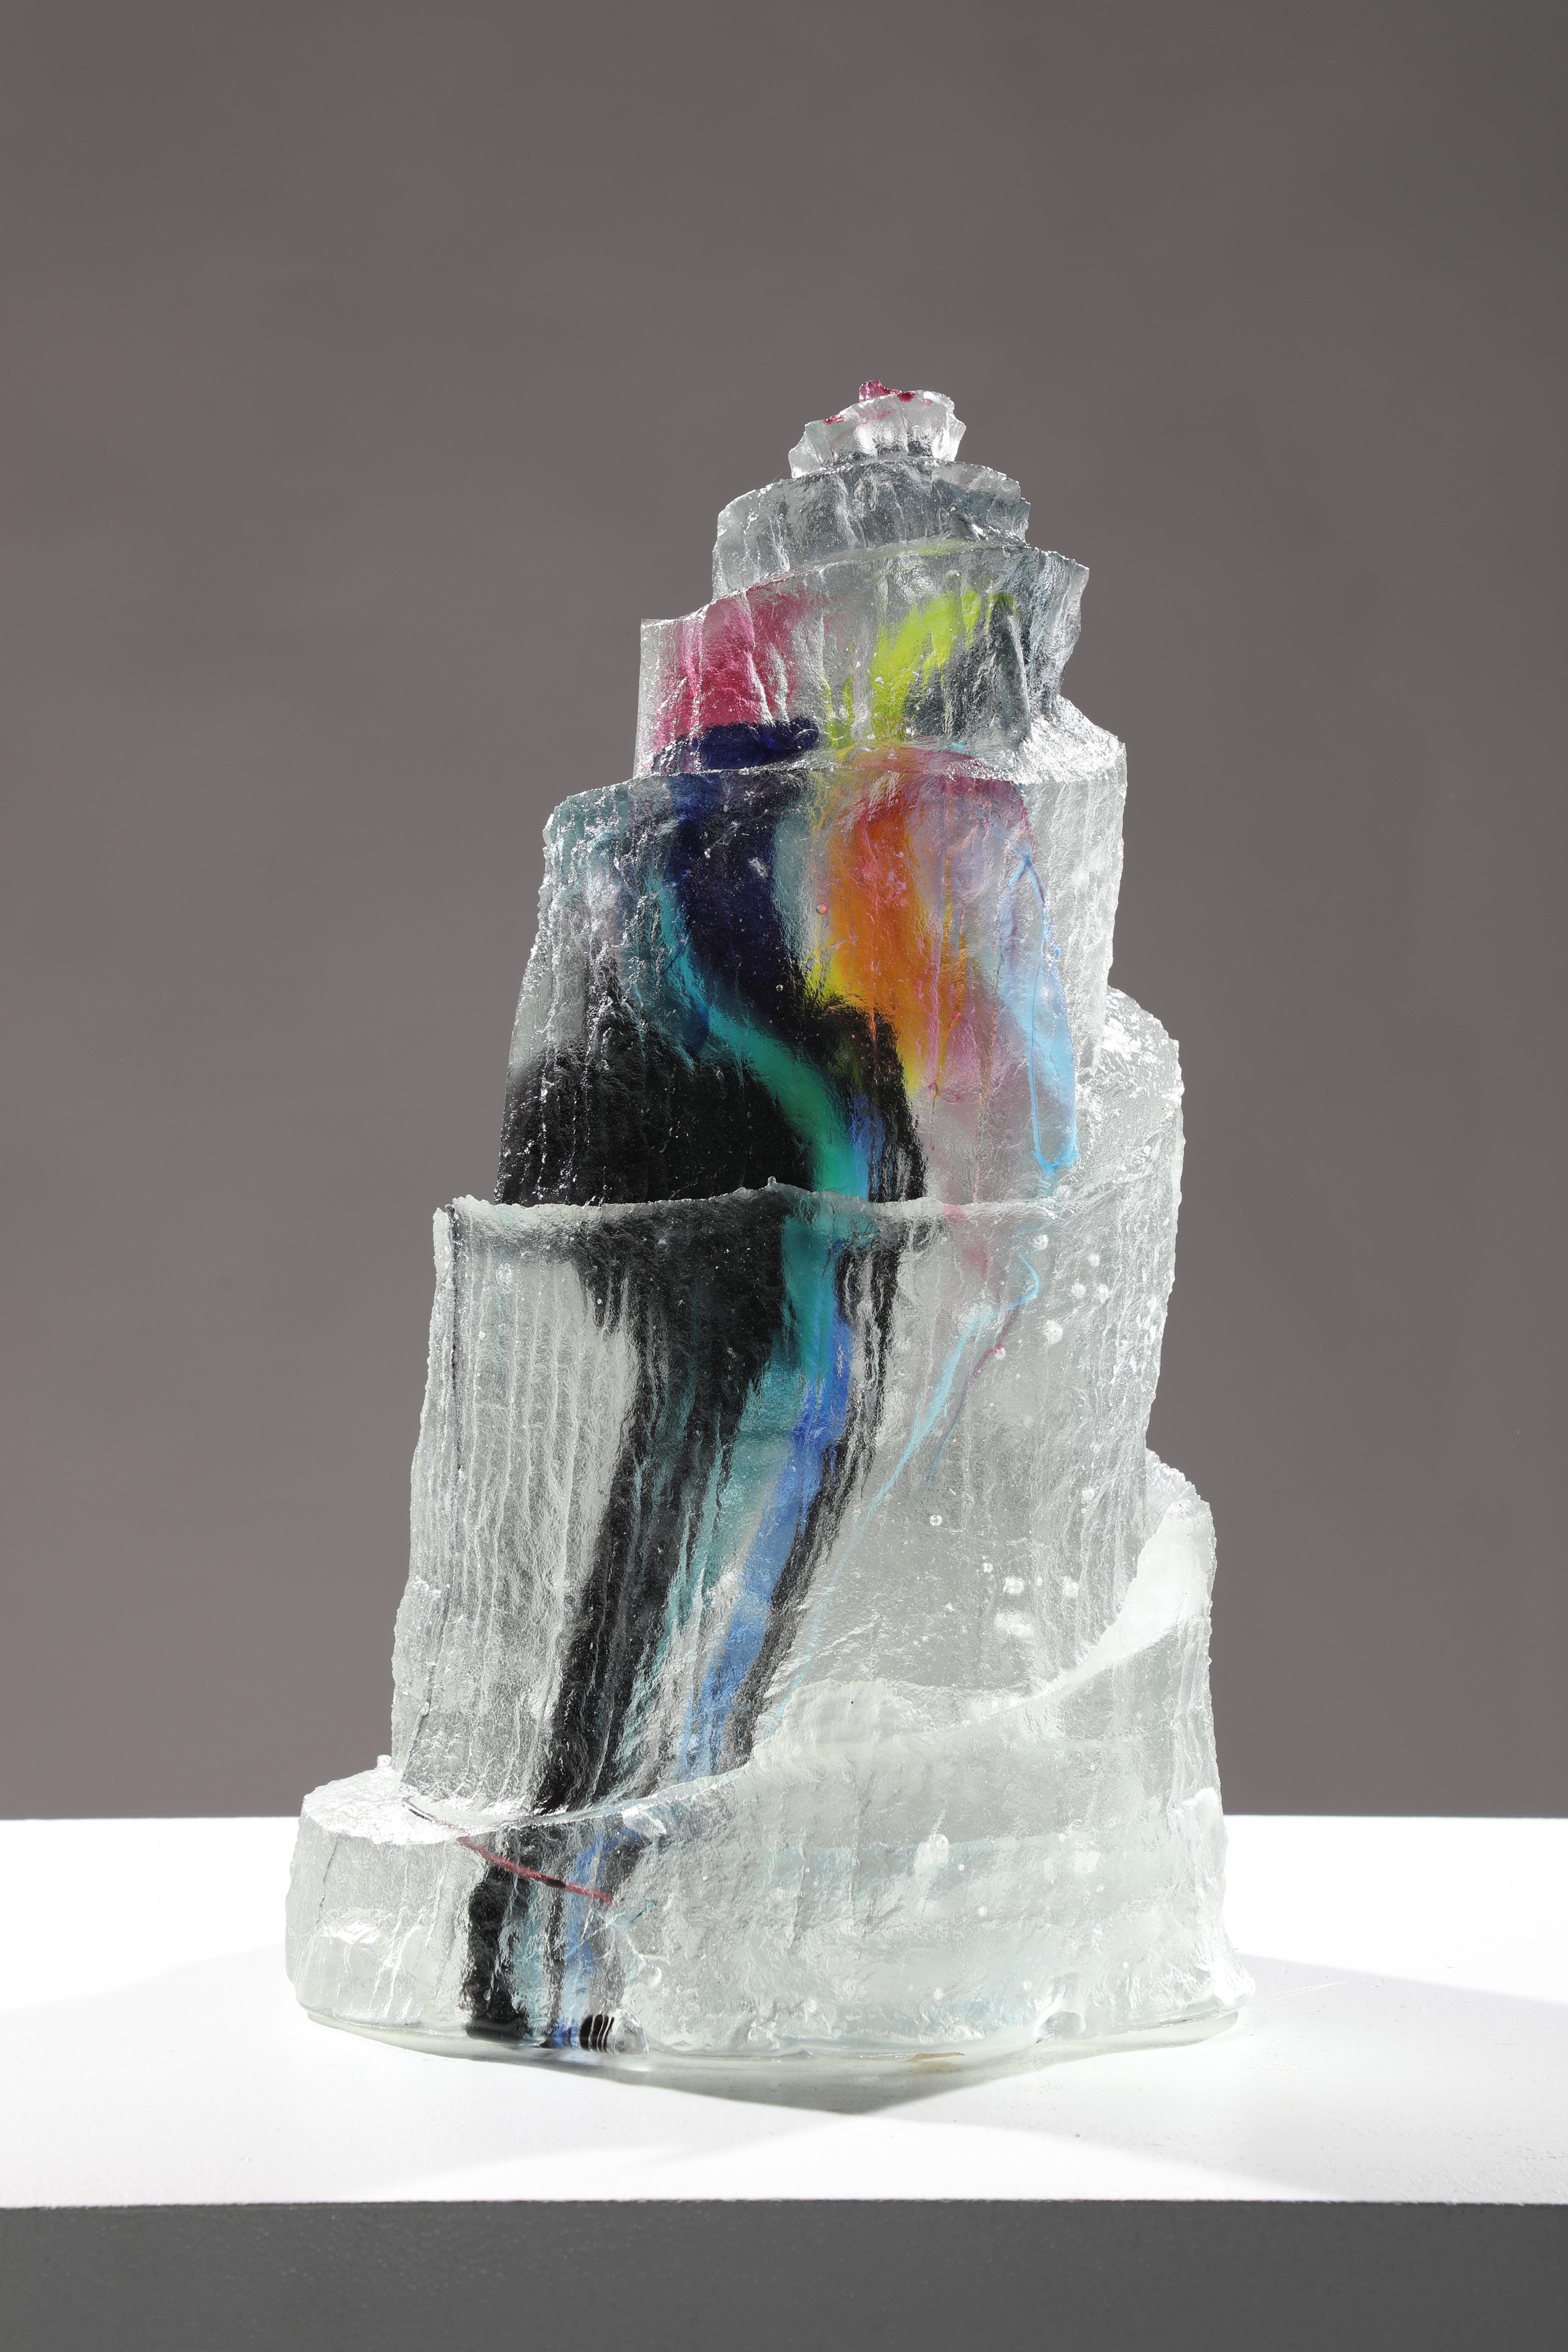 'Al Okab' is a contemporary abstract cast glass sculpture by David Ruth from his Internal Space series.  This part of the series was inspired by astronomy and the distant galaxies and stars. David fused of various colored glass creates a layered,